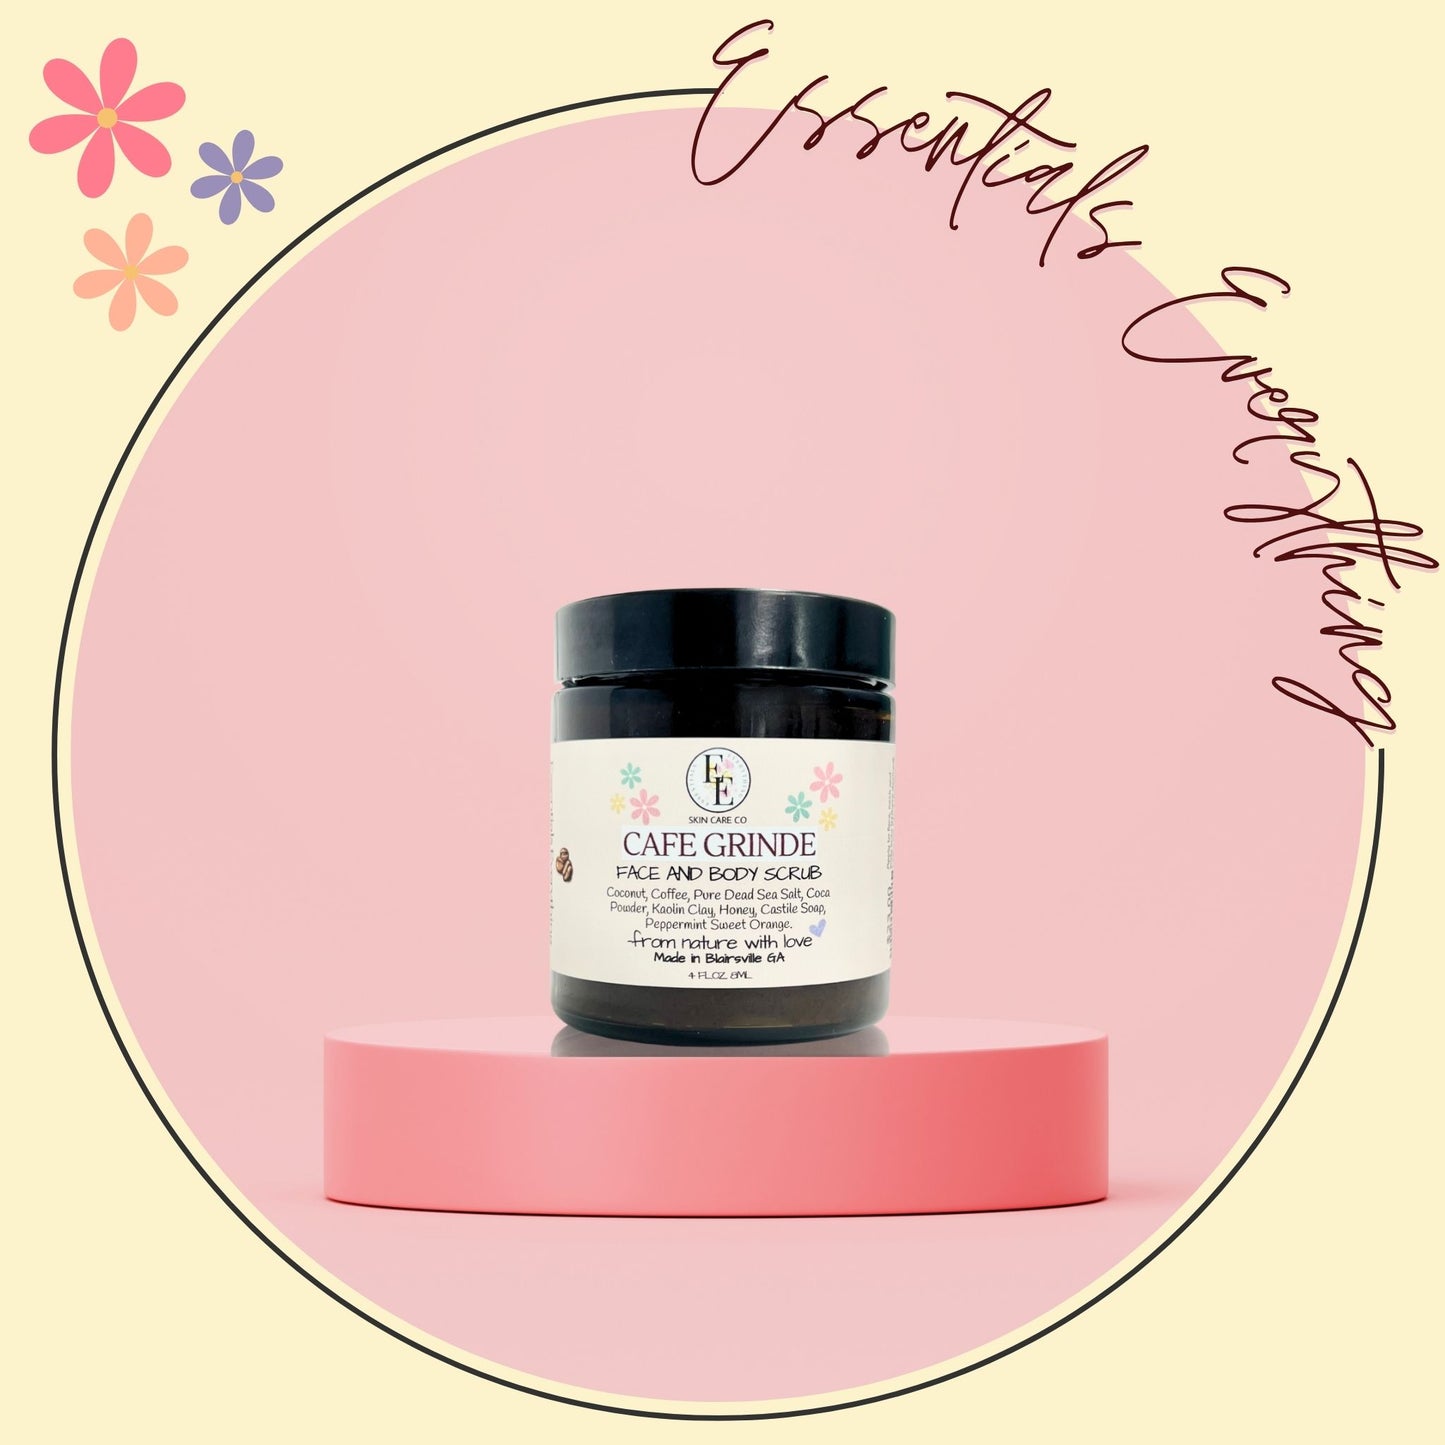 Café Grindé - All Natural Exfoliating Face & Body Scrub for All Skin Types from Essentials Everything Skin Care Co. 4 oz.